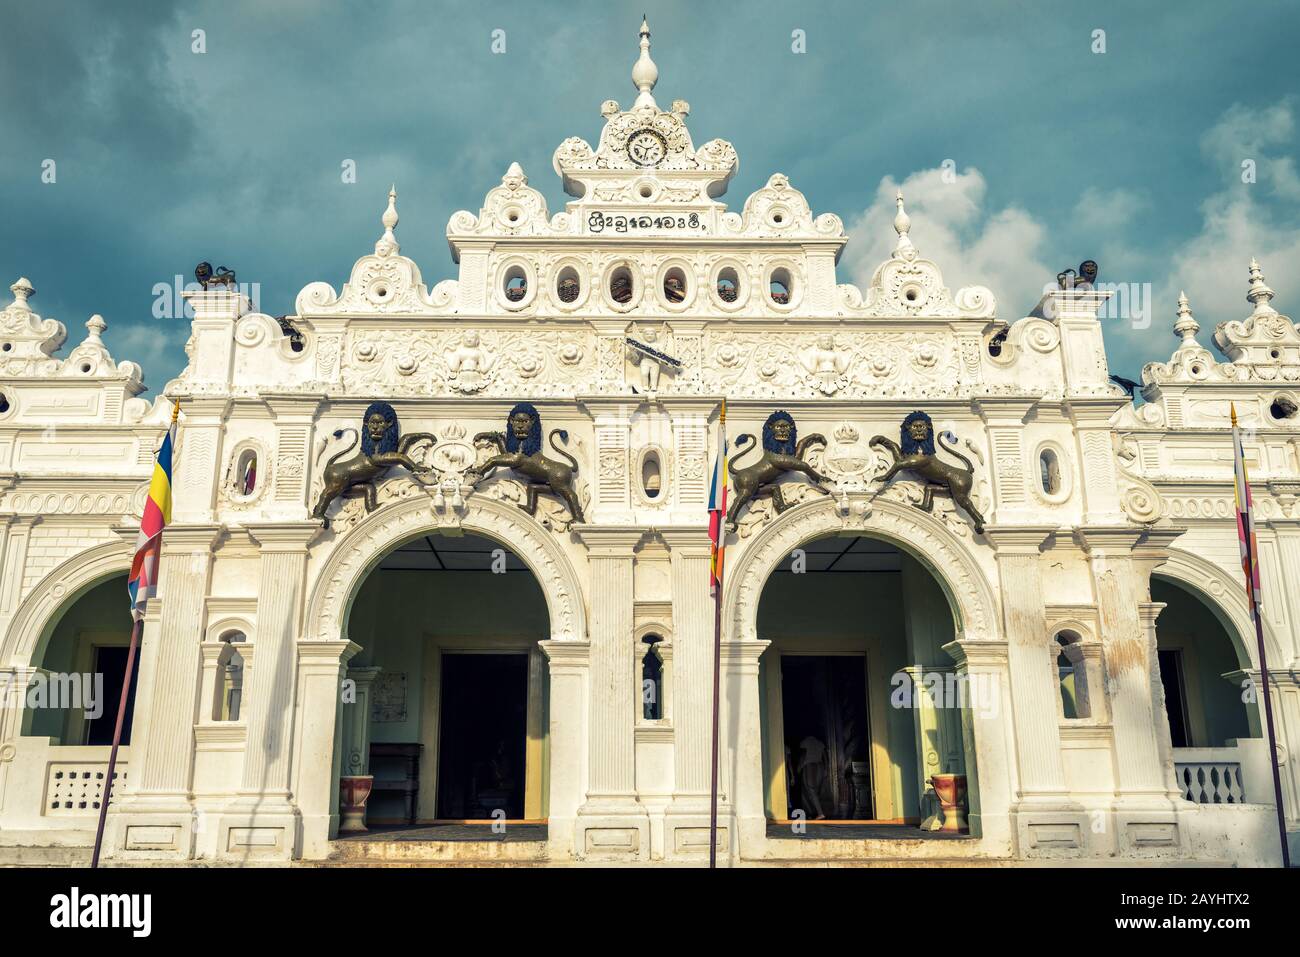 Facade of Wewurukannala Vihara temple in the town of Dickwella, Sri Lanka. This is the old Buddhist temple. Stock Photo